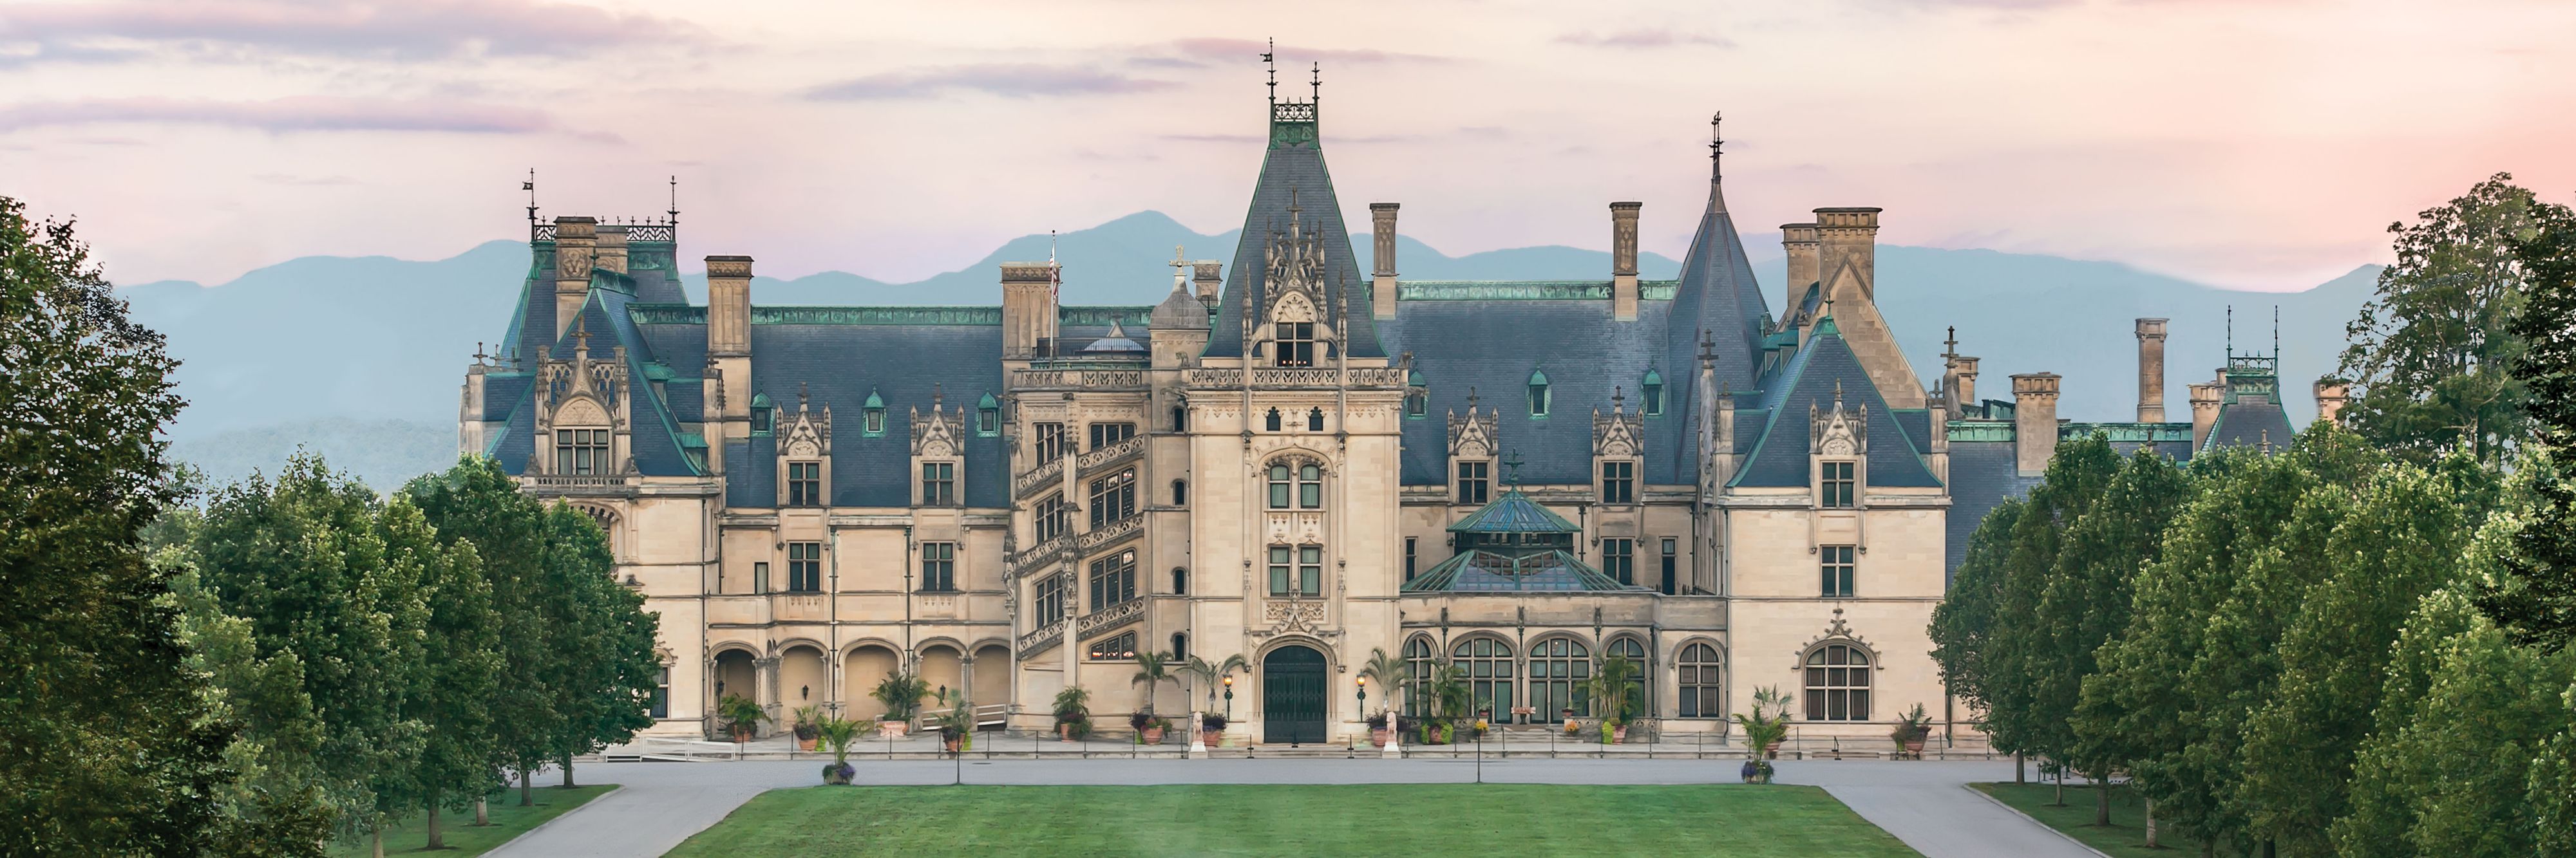 Biltmore exterior and grounds